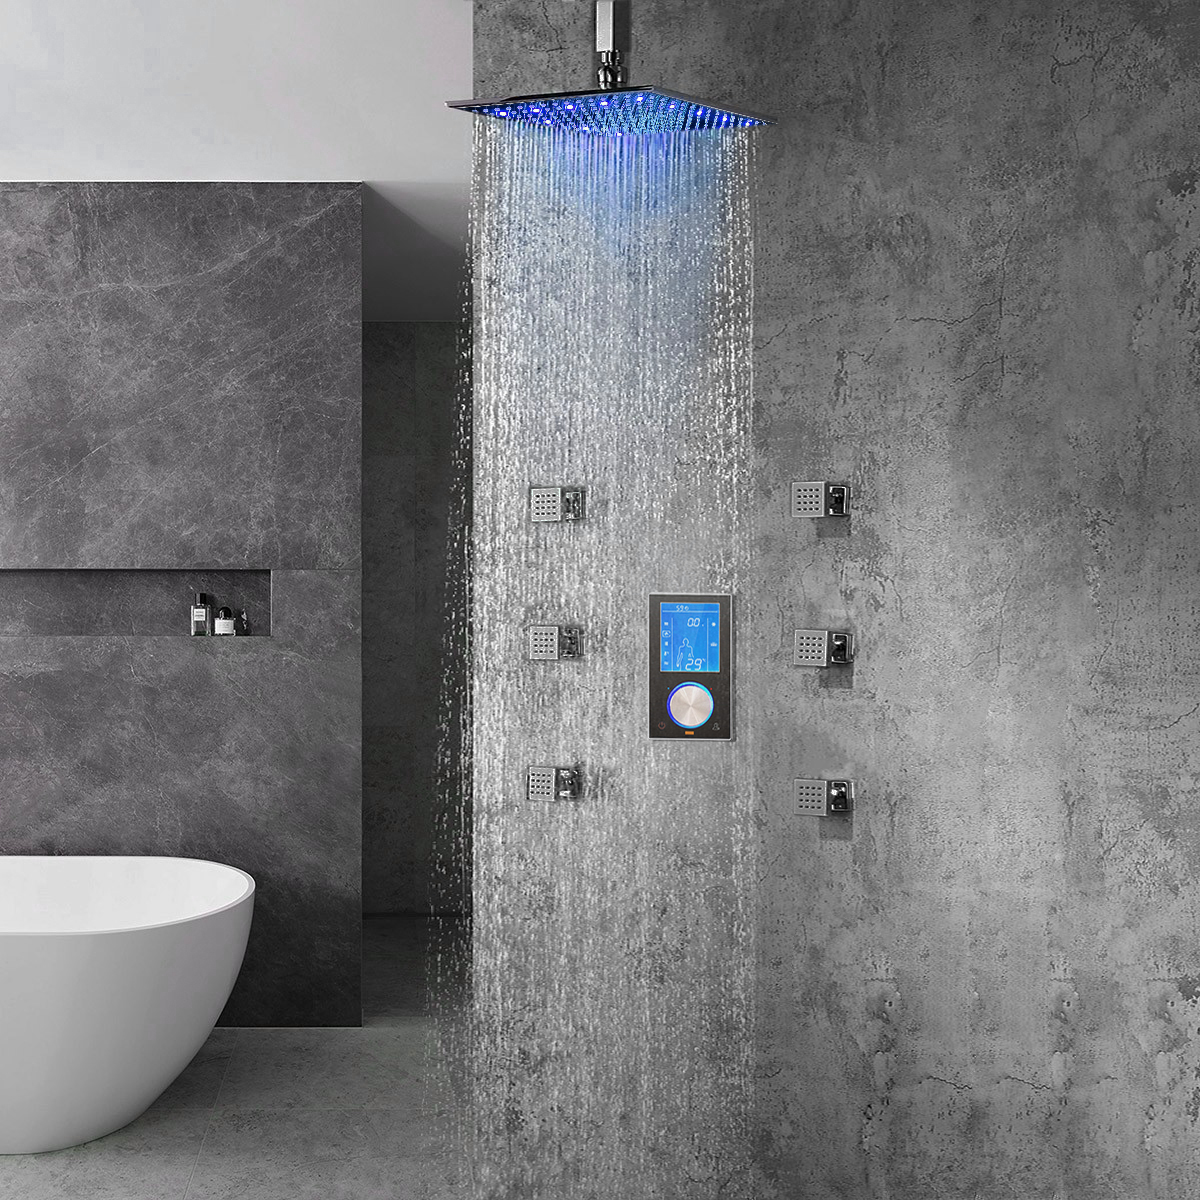 Romo Solid Brass Color Changing LED Rain Shower Head with Digital Mixer and 360° Adjustable Body Jets